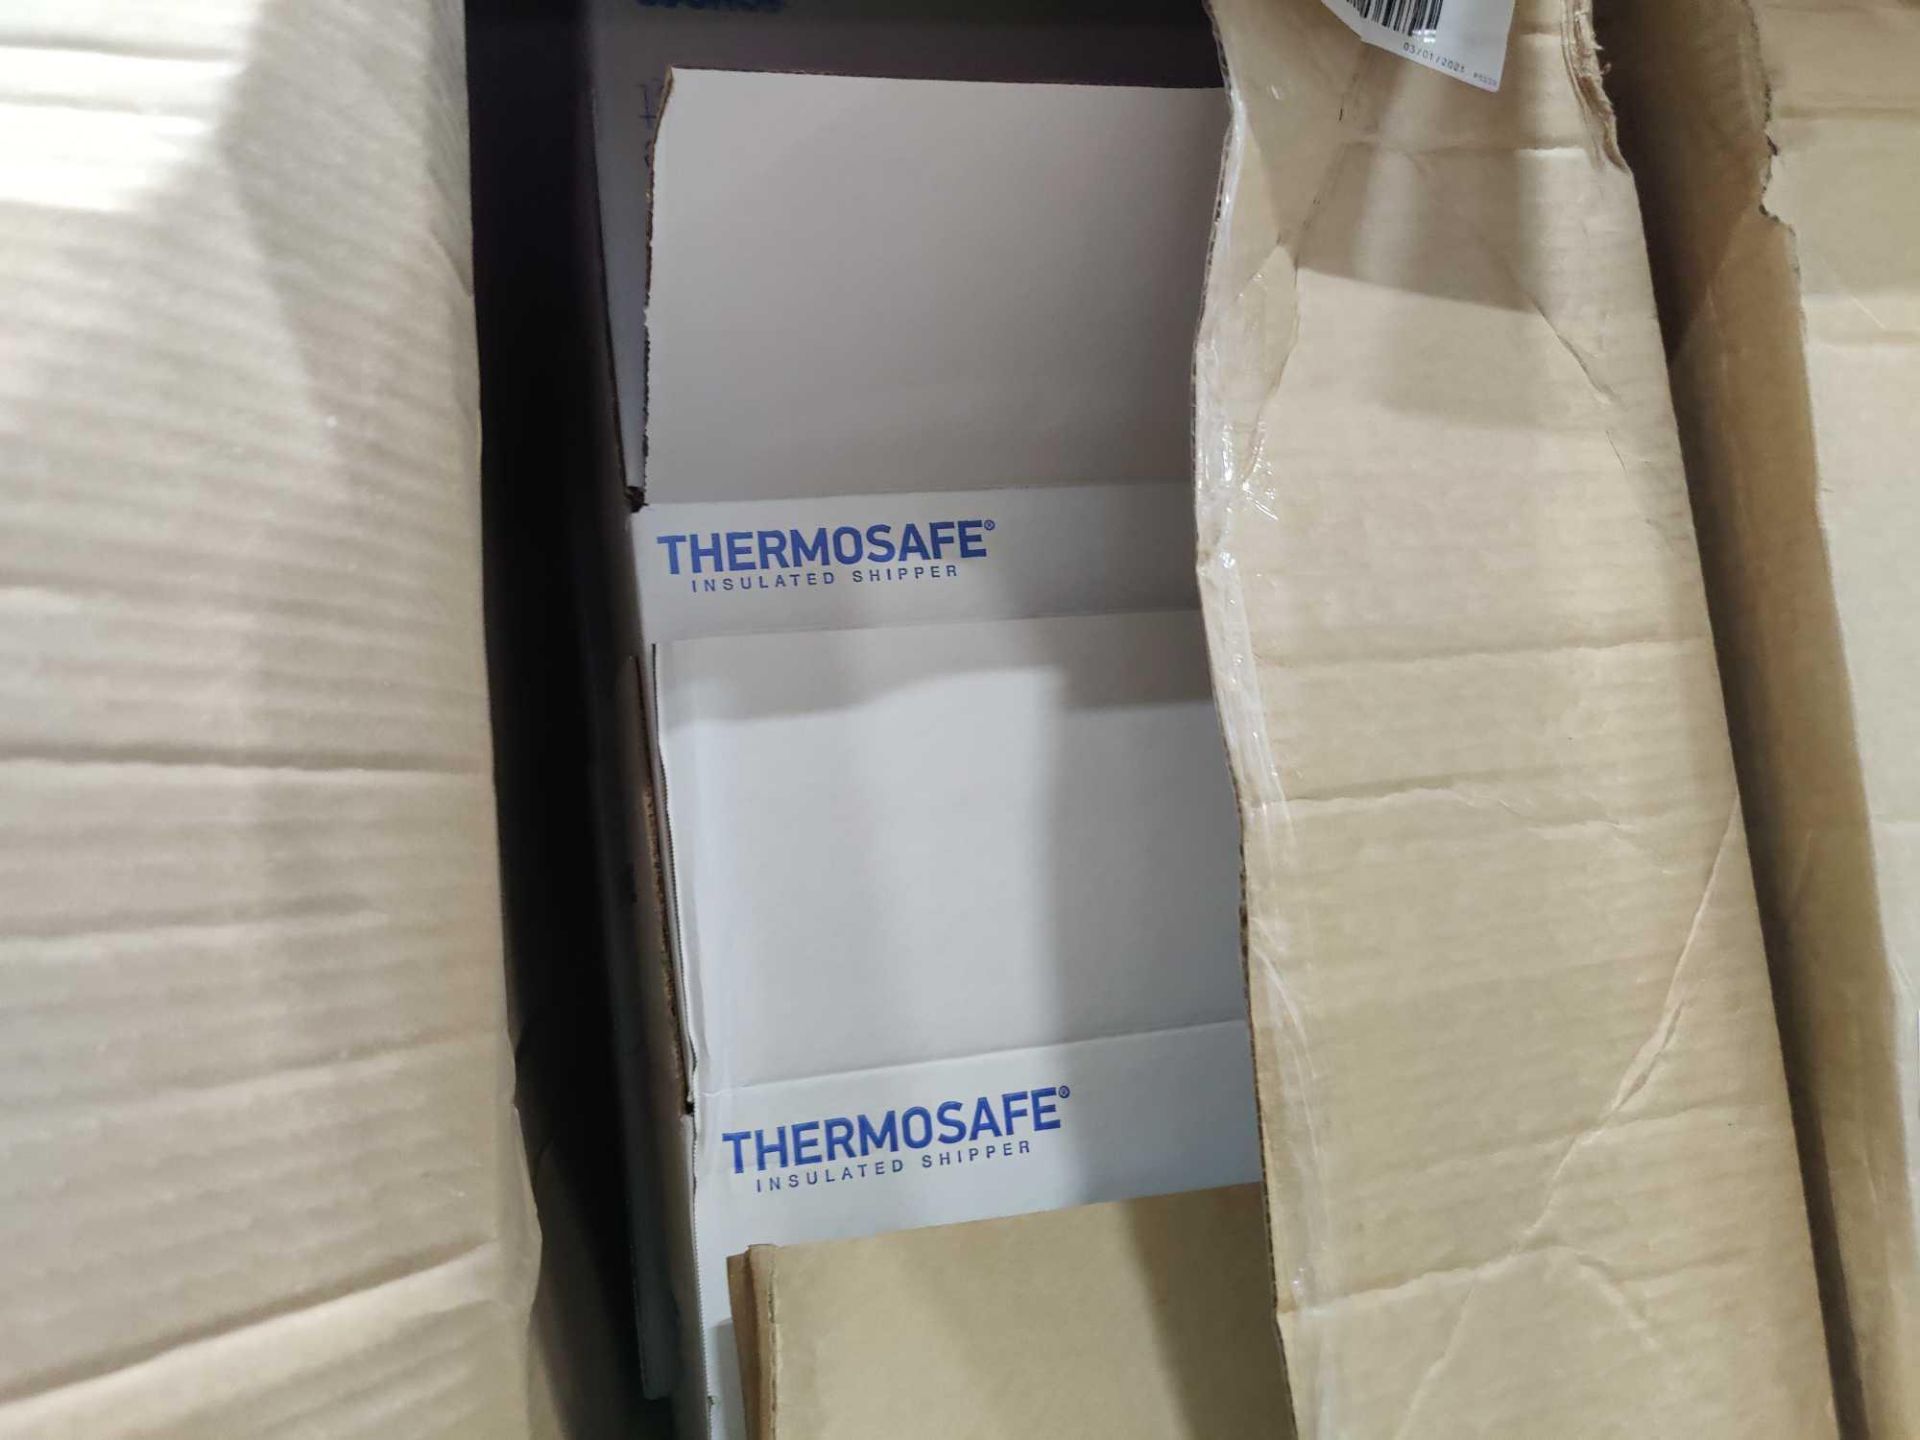 Thermosafe shippers - Image 3 of 5